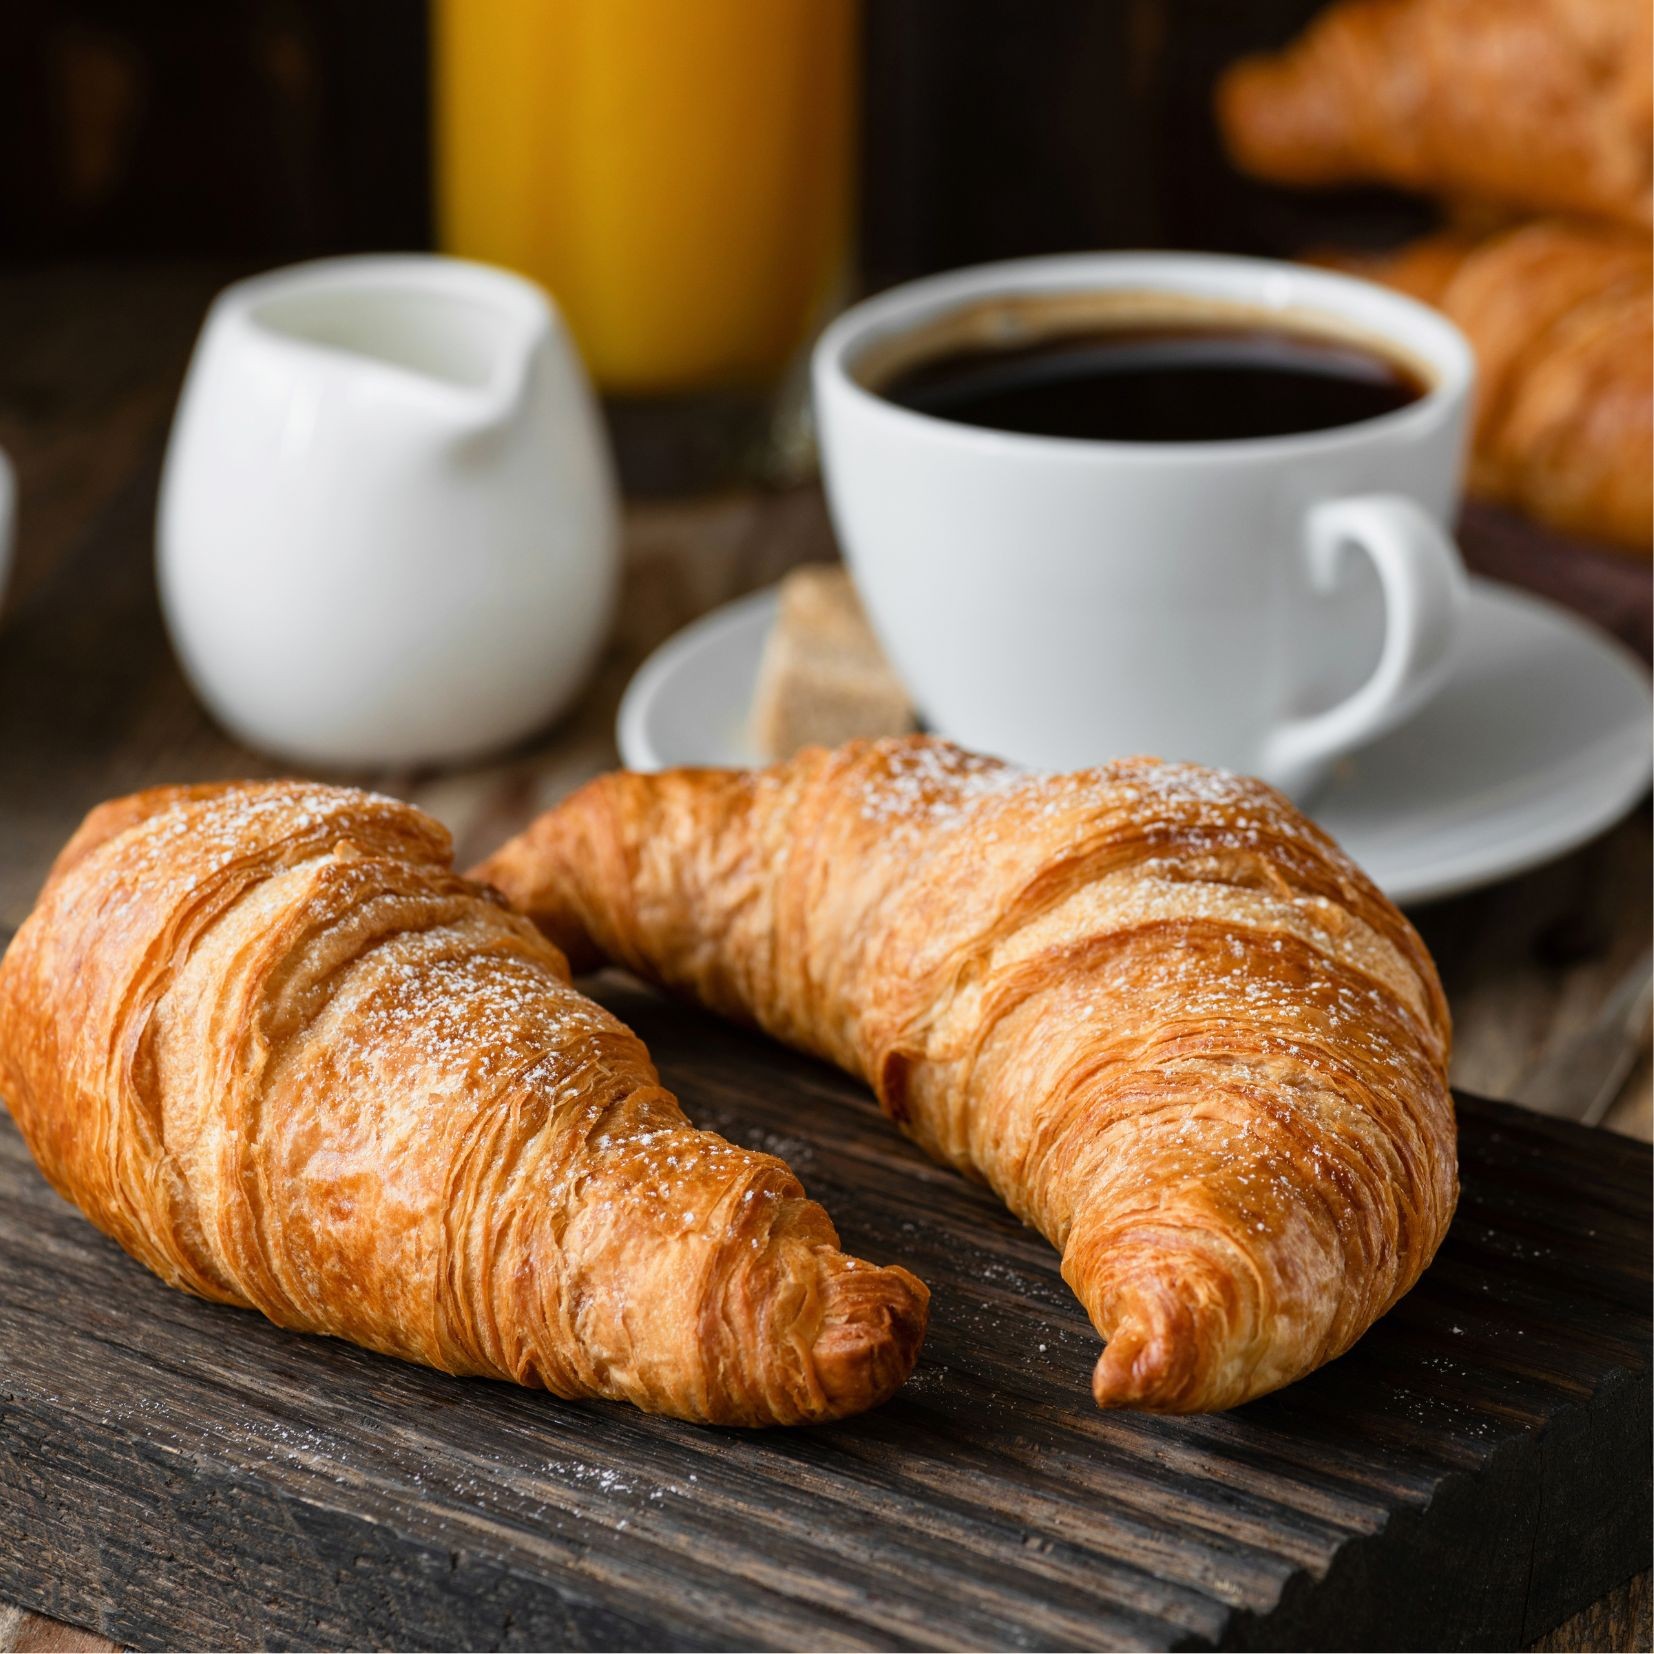 Coffe - croissant time in French